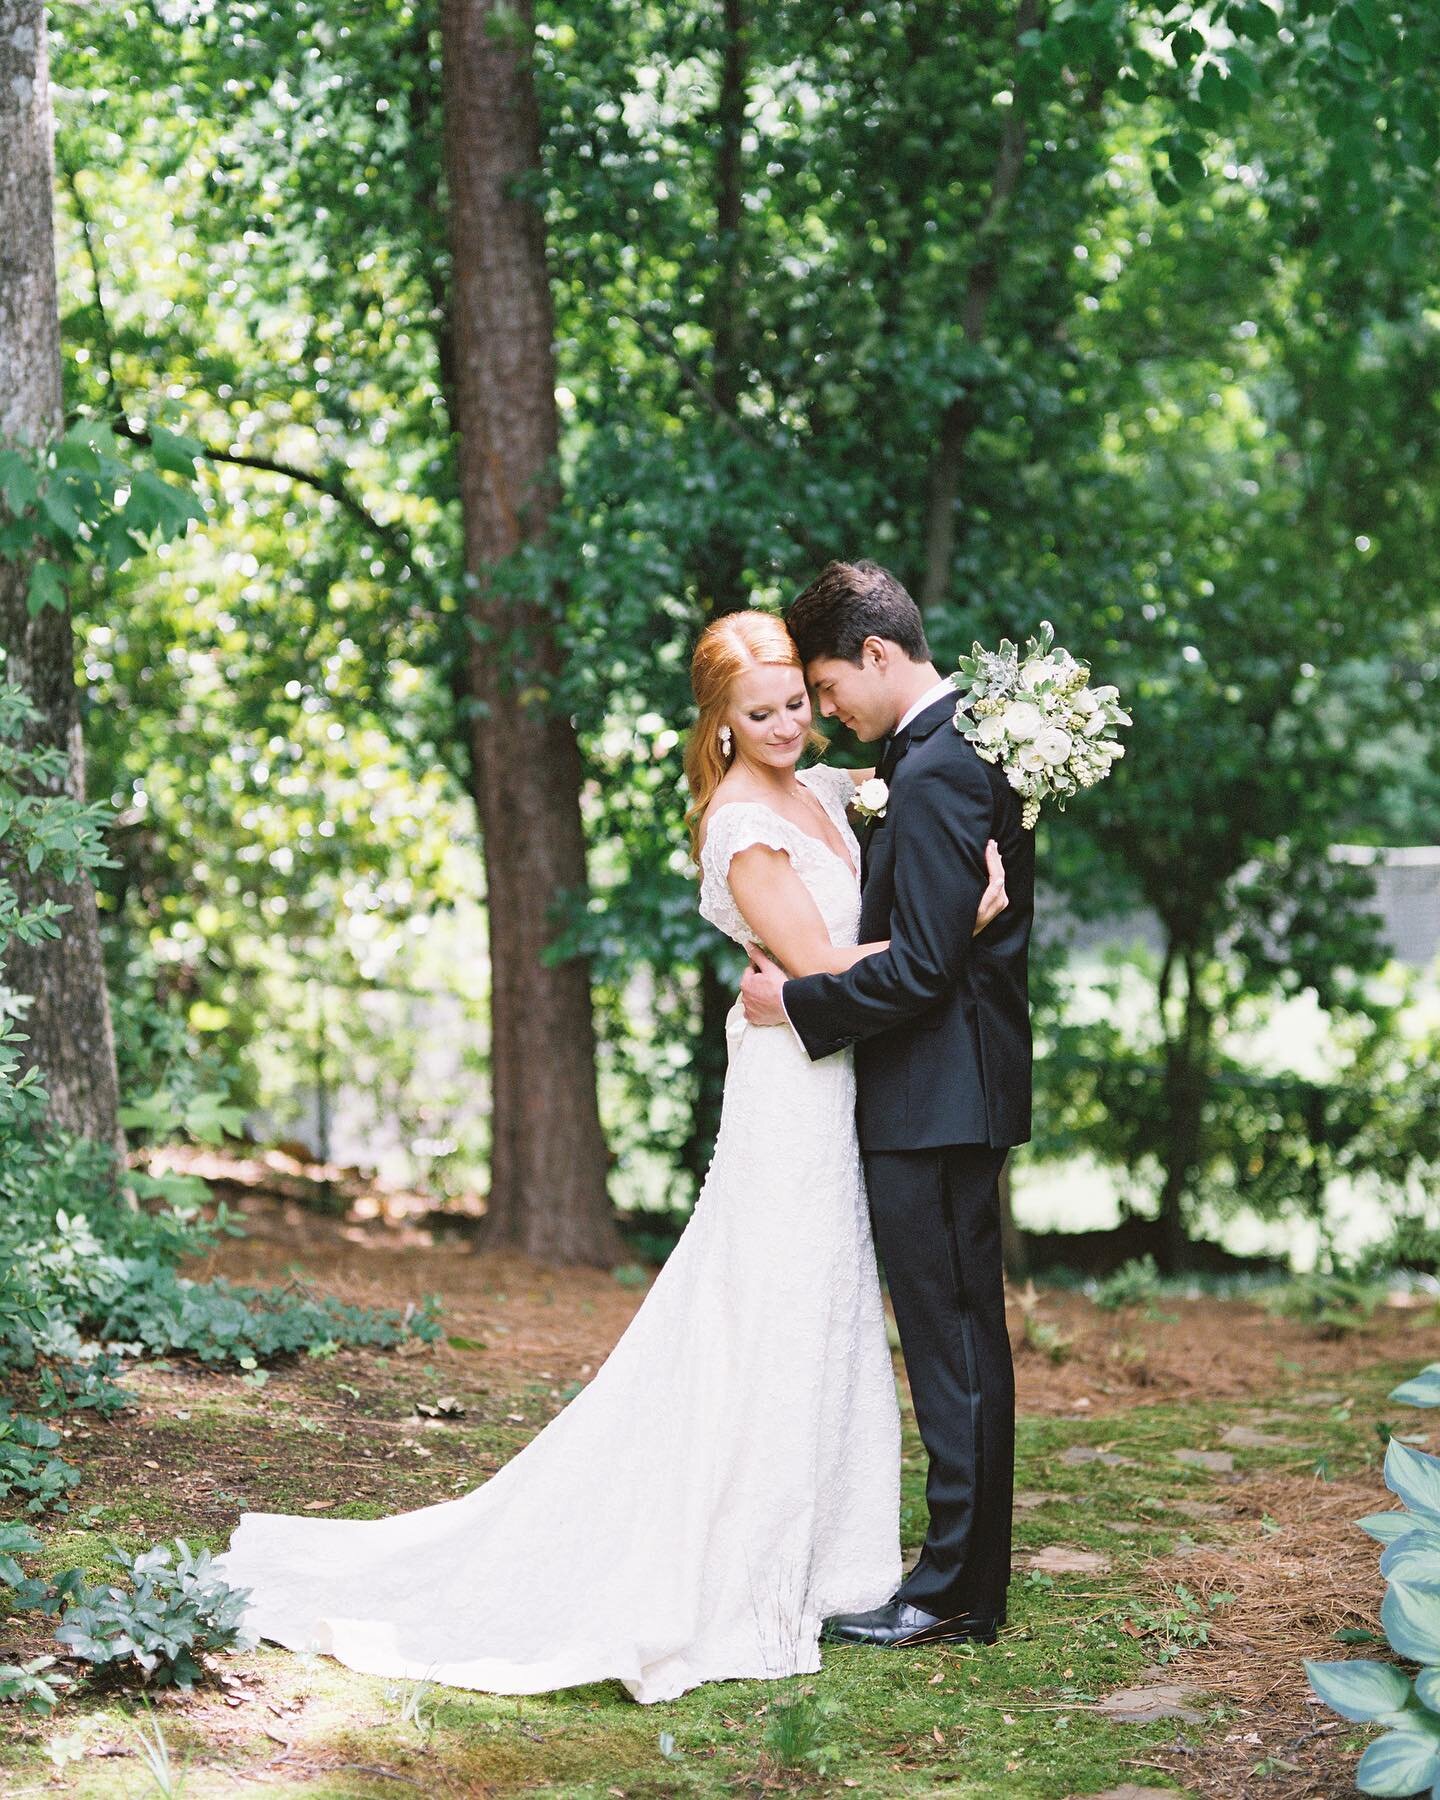 Couldn&rsquo;t wait any longer to share some film shots of Kinsey and Hunter! They shared their first look in an intimate backyard garden near Atlanta and exchanged vows at the beautiful @flinthillweddings ! 
.
Photography: @haintbluecollective
Film 